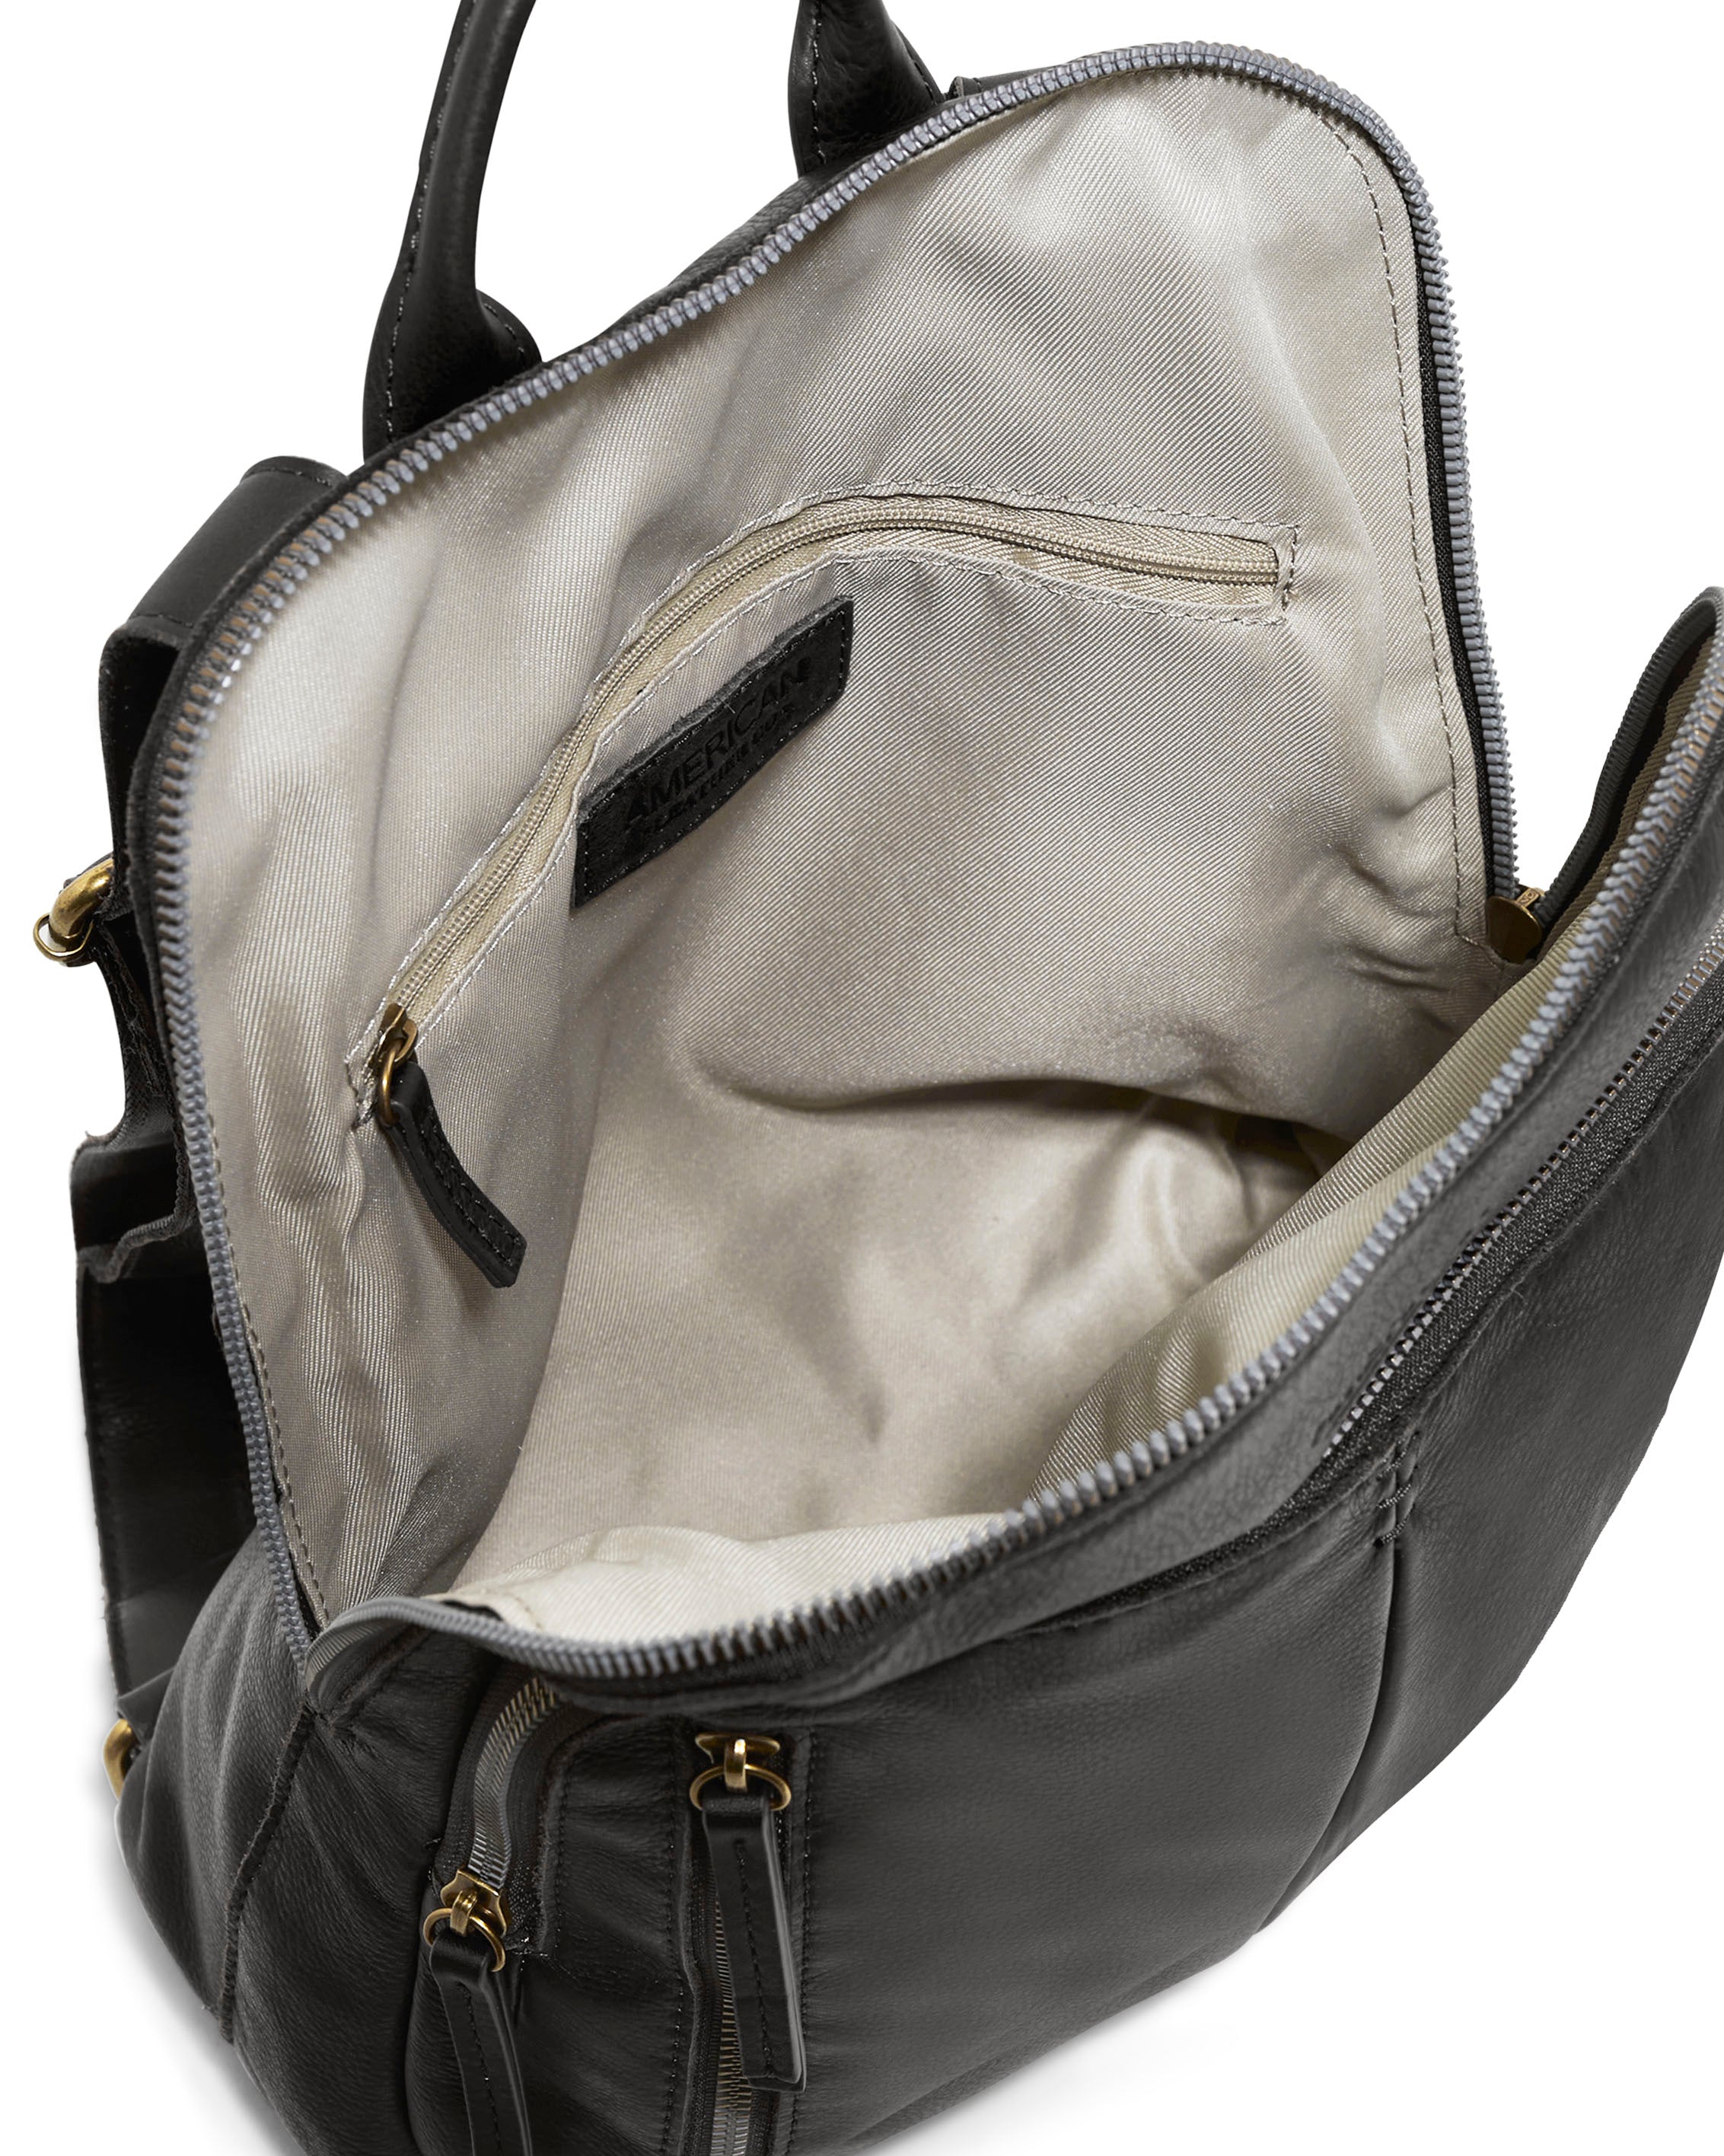 American Leather Co. Cleveland Backpack Black